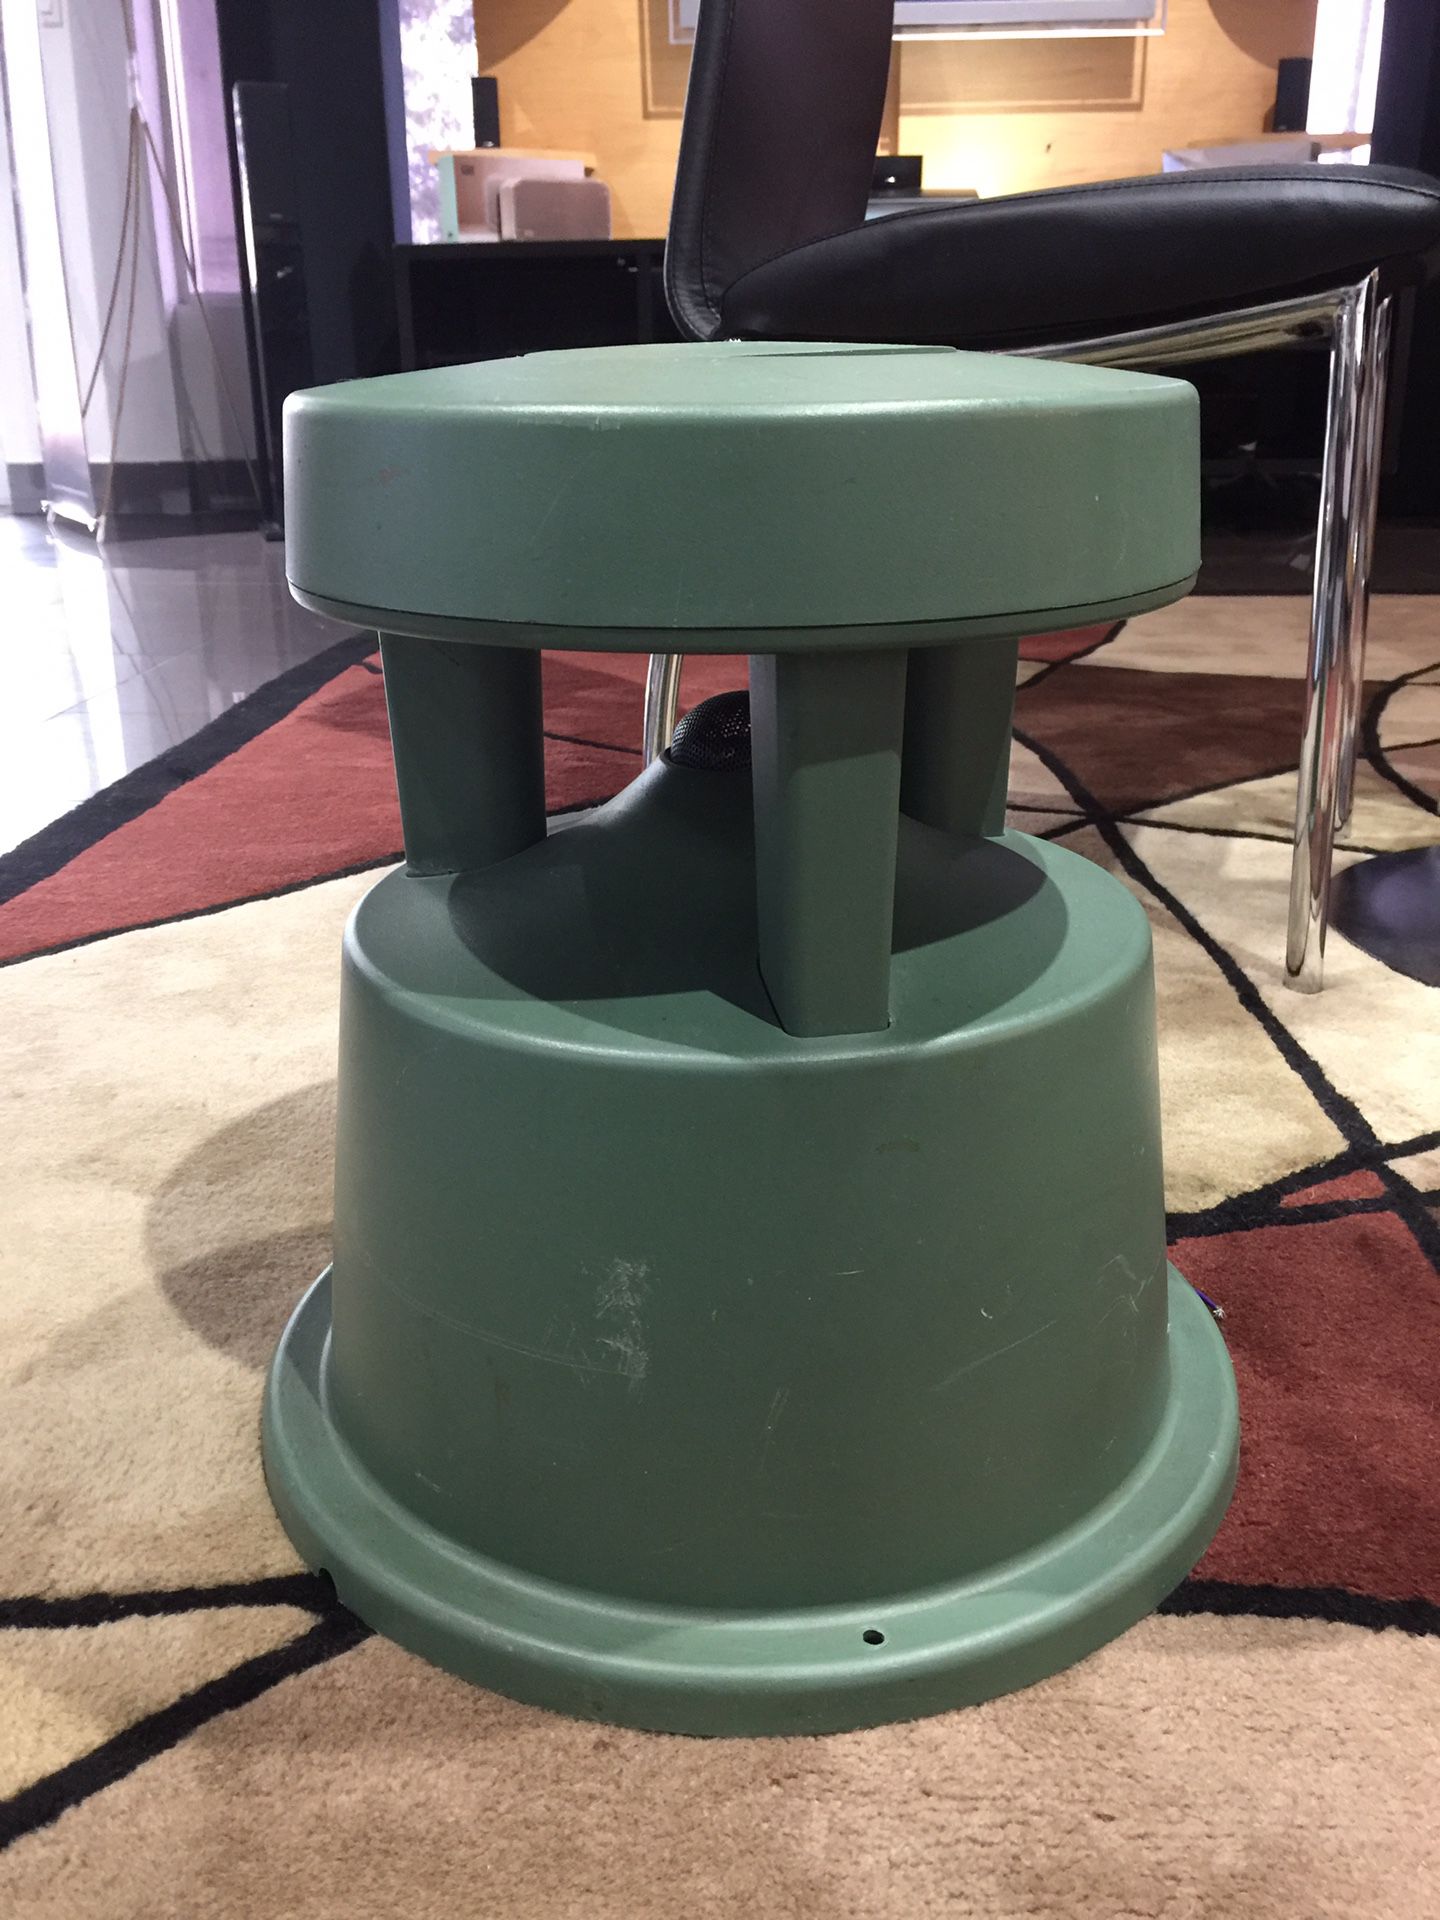 Bose Space 51 Outdoors Speakers for Sale in Doral, FL - OfferUp